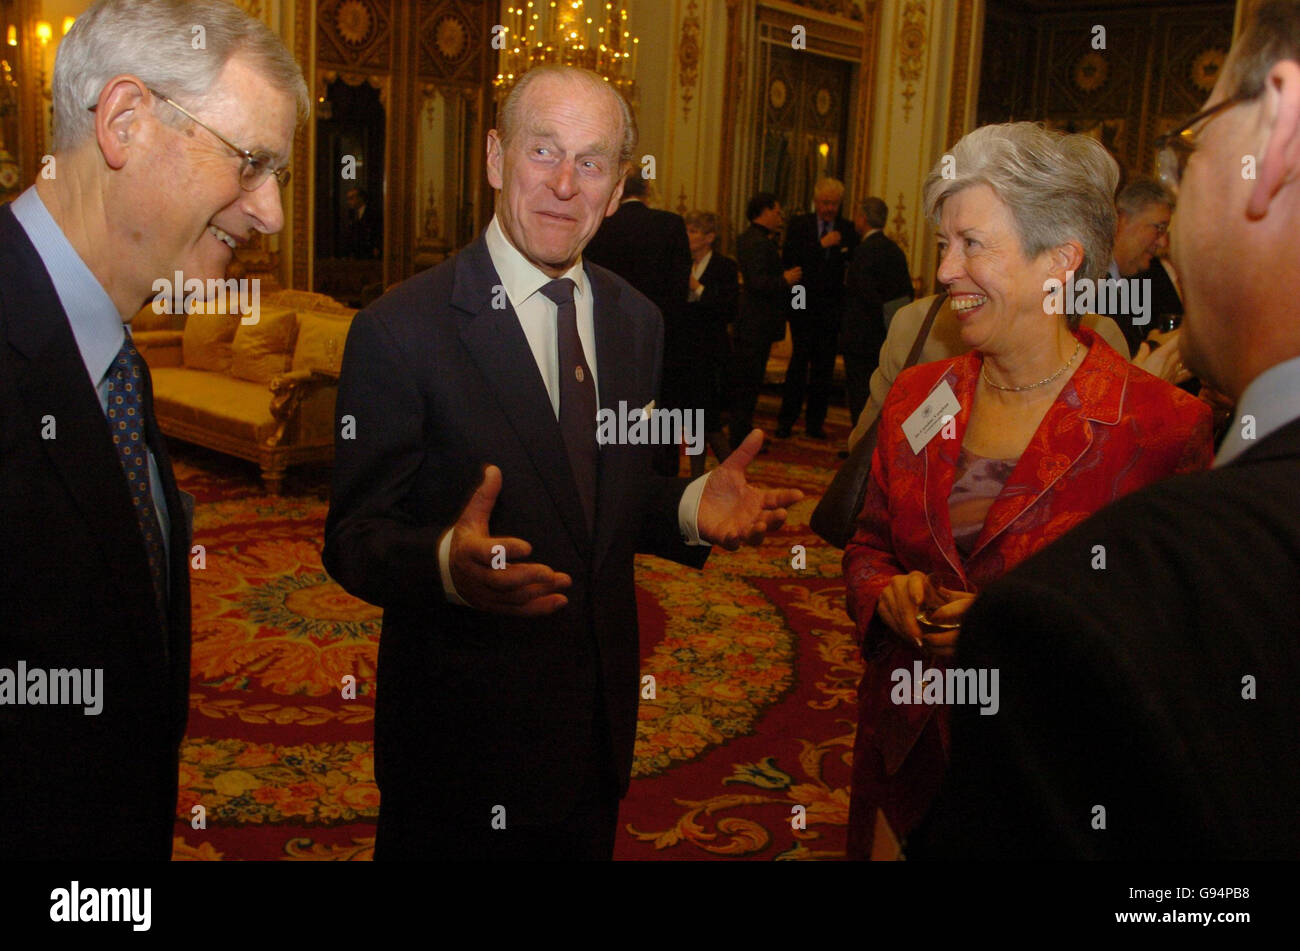 The Duke of Edinburgh jokes with Dr Caroline Vaughan and Sir Alan Rudge (left) inside the White Drawing Room at Buckingham Palace in central London, Monday February 20, 2006. The Duke of Edinburgh was being honoured with the Royal Commission's inaugural medal for the significant contribution made by HRH as President of the Commission over the past 41 years, the first such medal to have awarded by the Royal Commission since 1851. PRESS ASSOCIATION PHOTO. Photo credit should read: Johnny Green/WPA/PA. Stock Photo